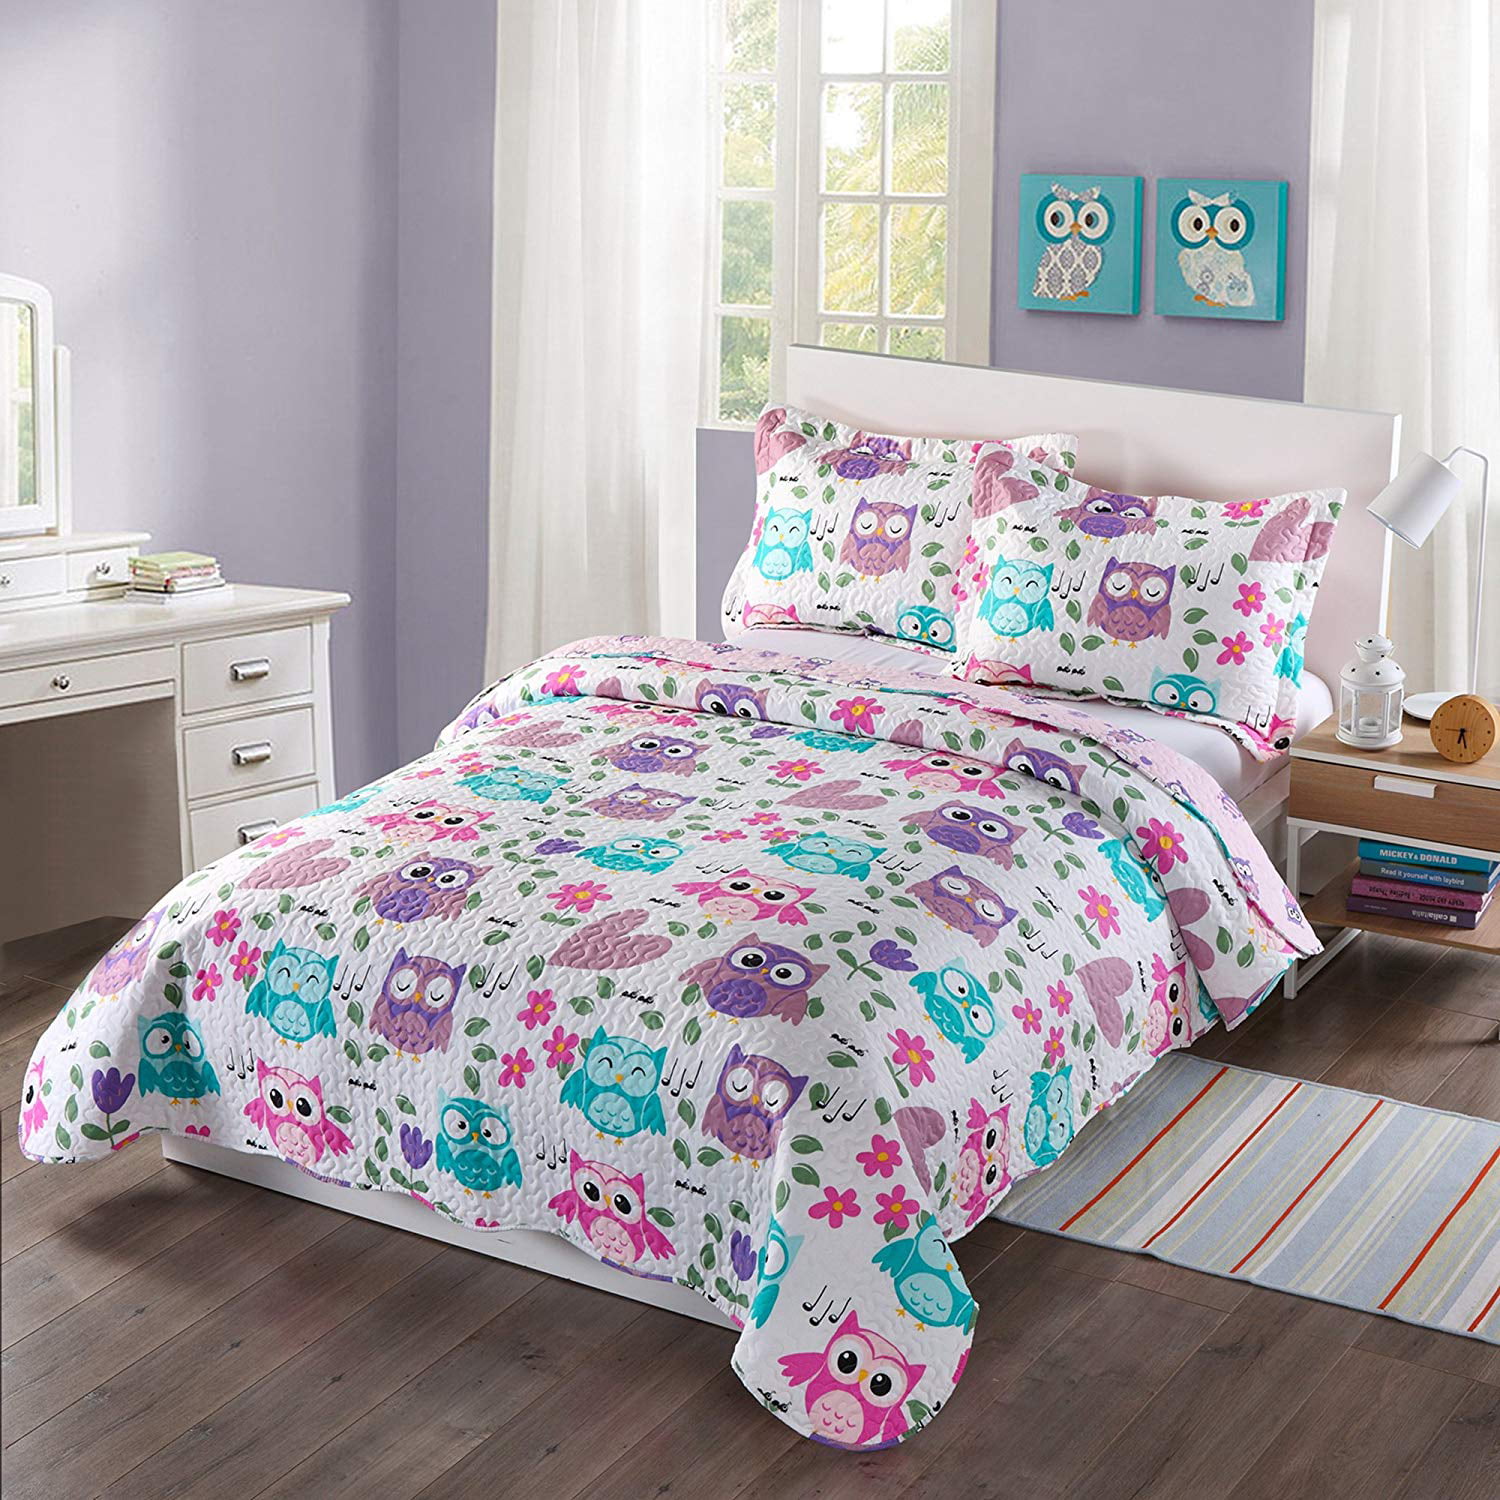 Full Size Purple Floral Striped Full MarCielo 3 Piece Kids Bedspread Quilts Set Throw Blanket for Teens Girls Bed Printed Bedding Coverlet